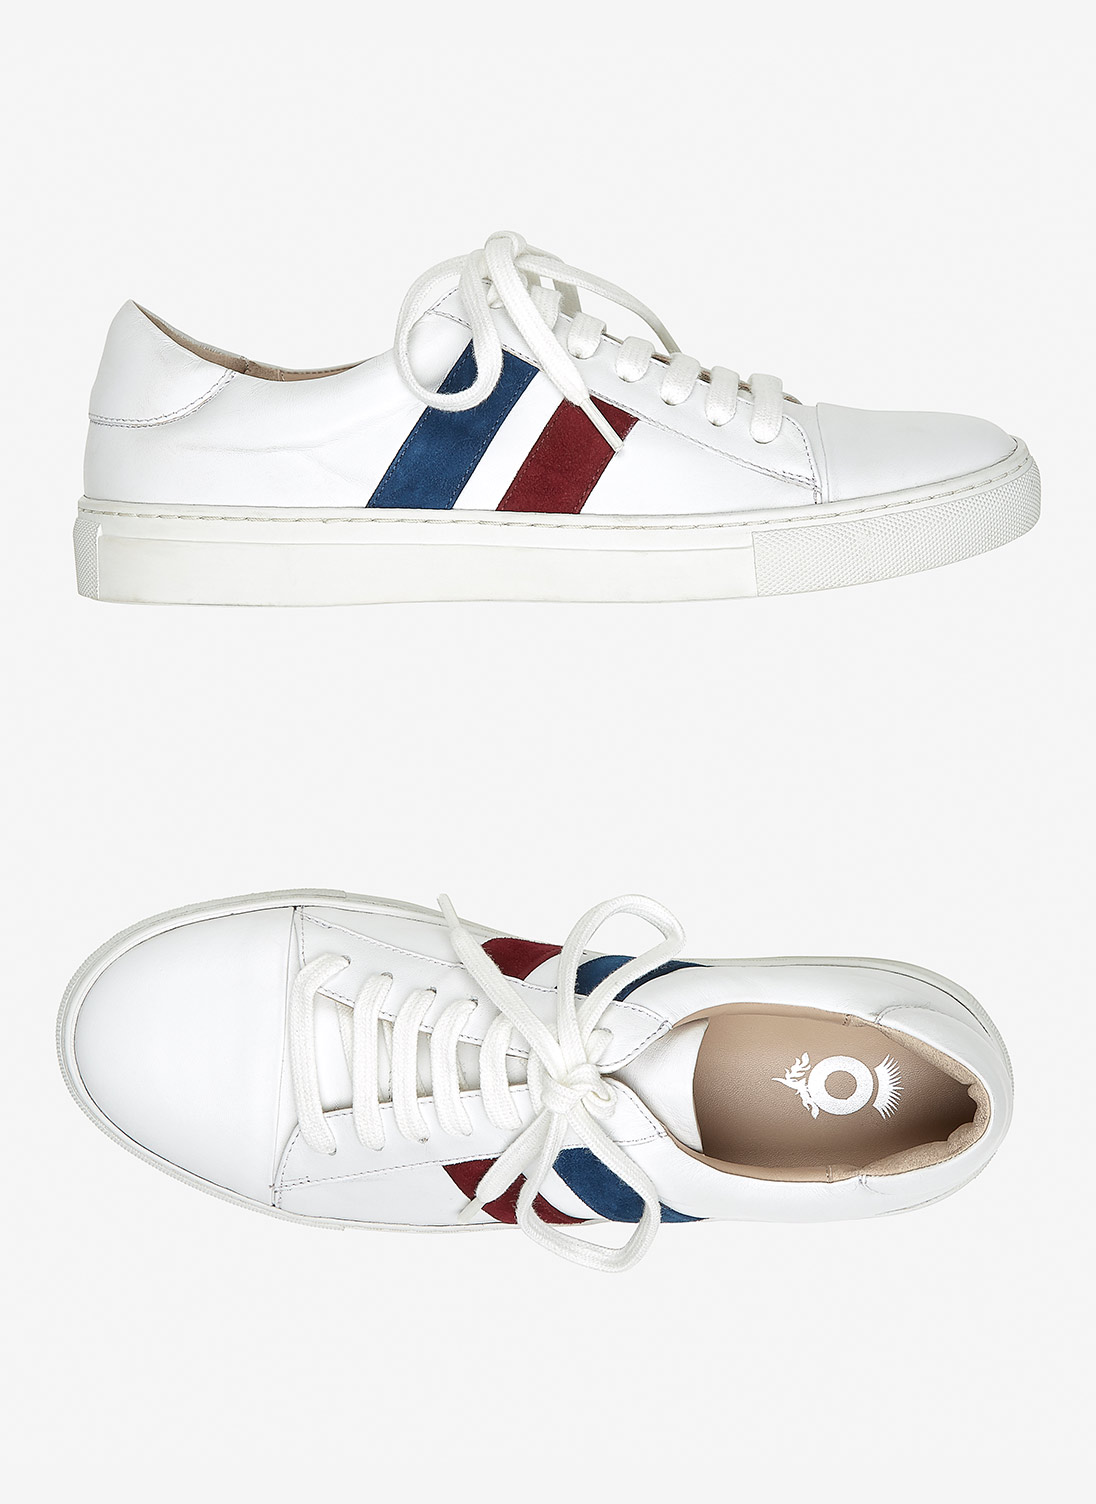 Leather & Suede Stripe Gym Shoes White